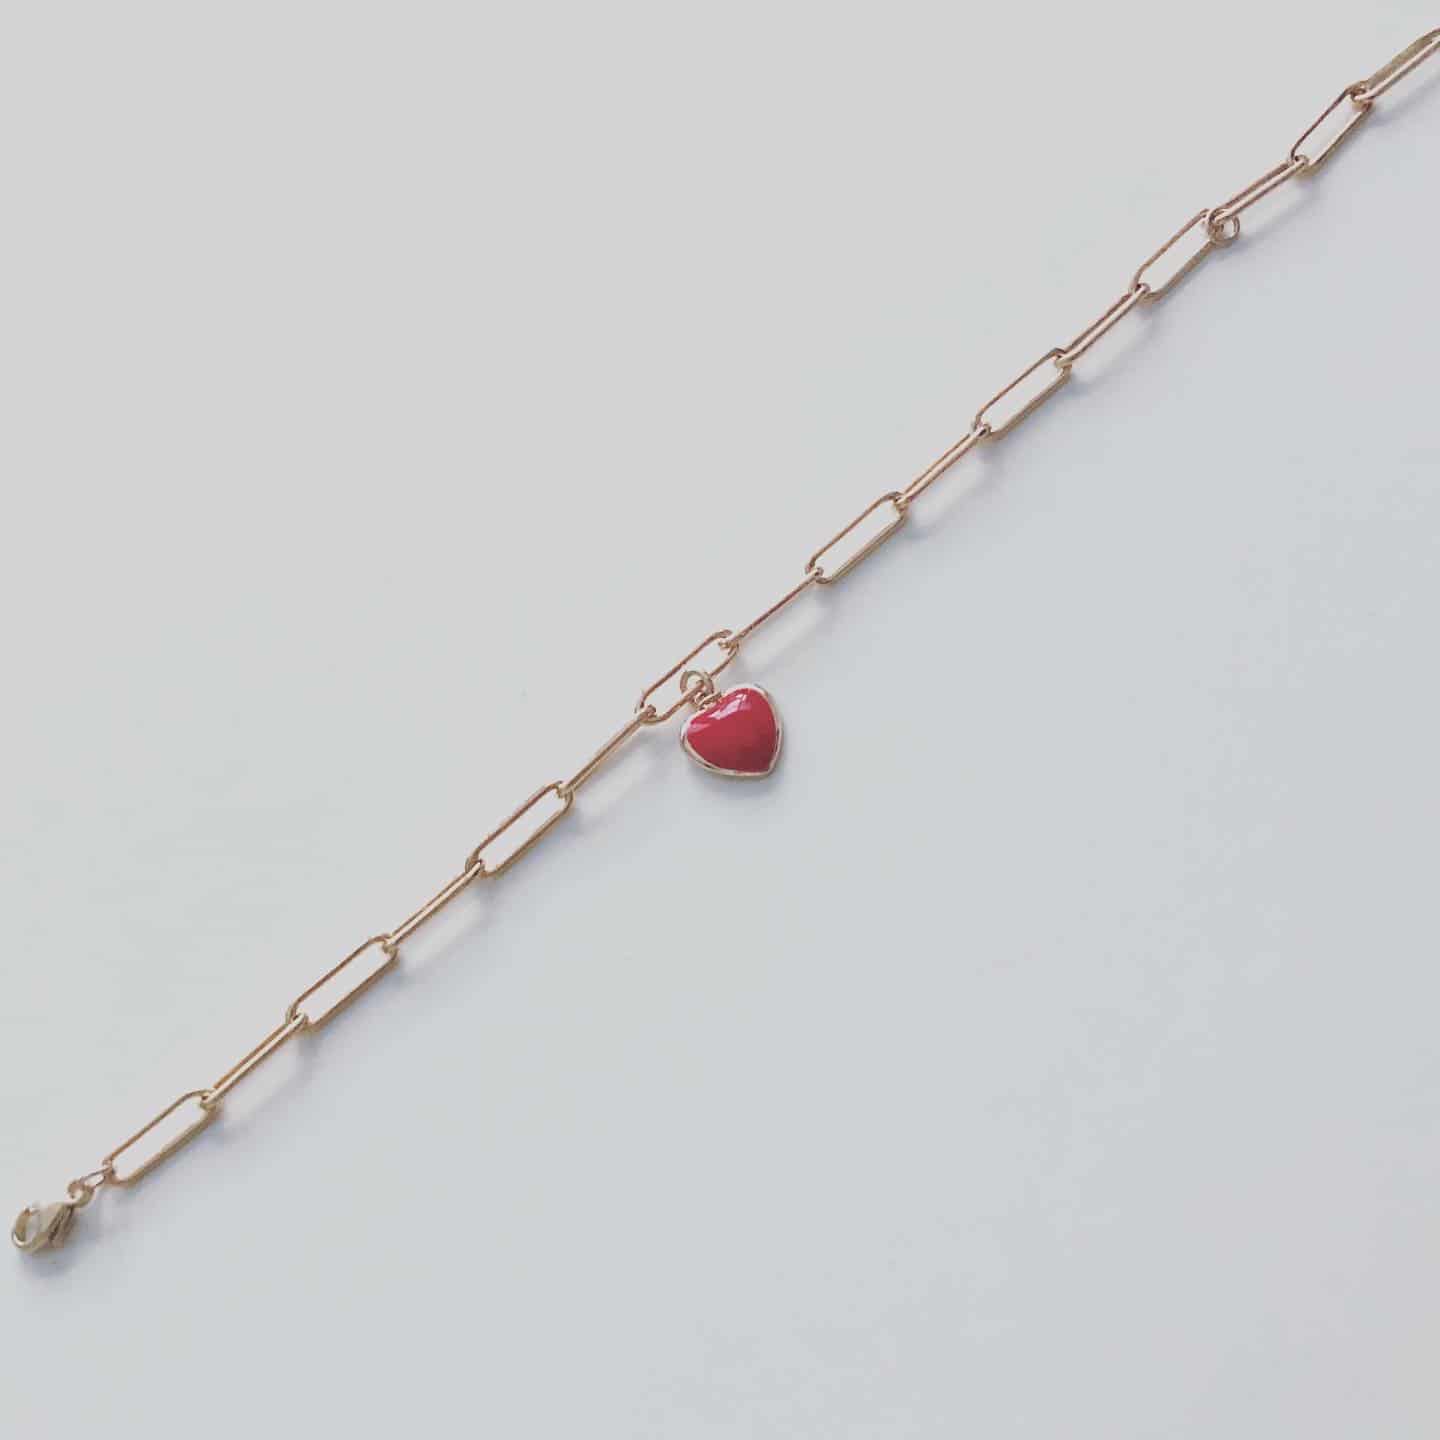 The Andi, Chain Link with heart charm